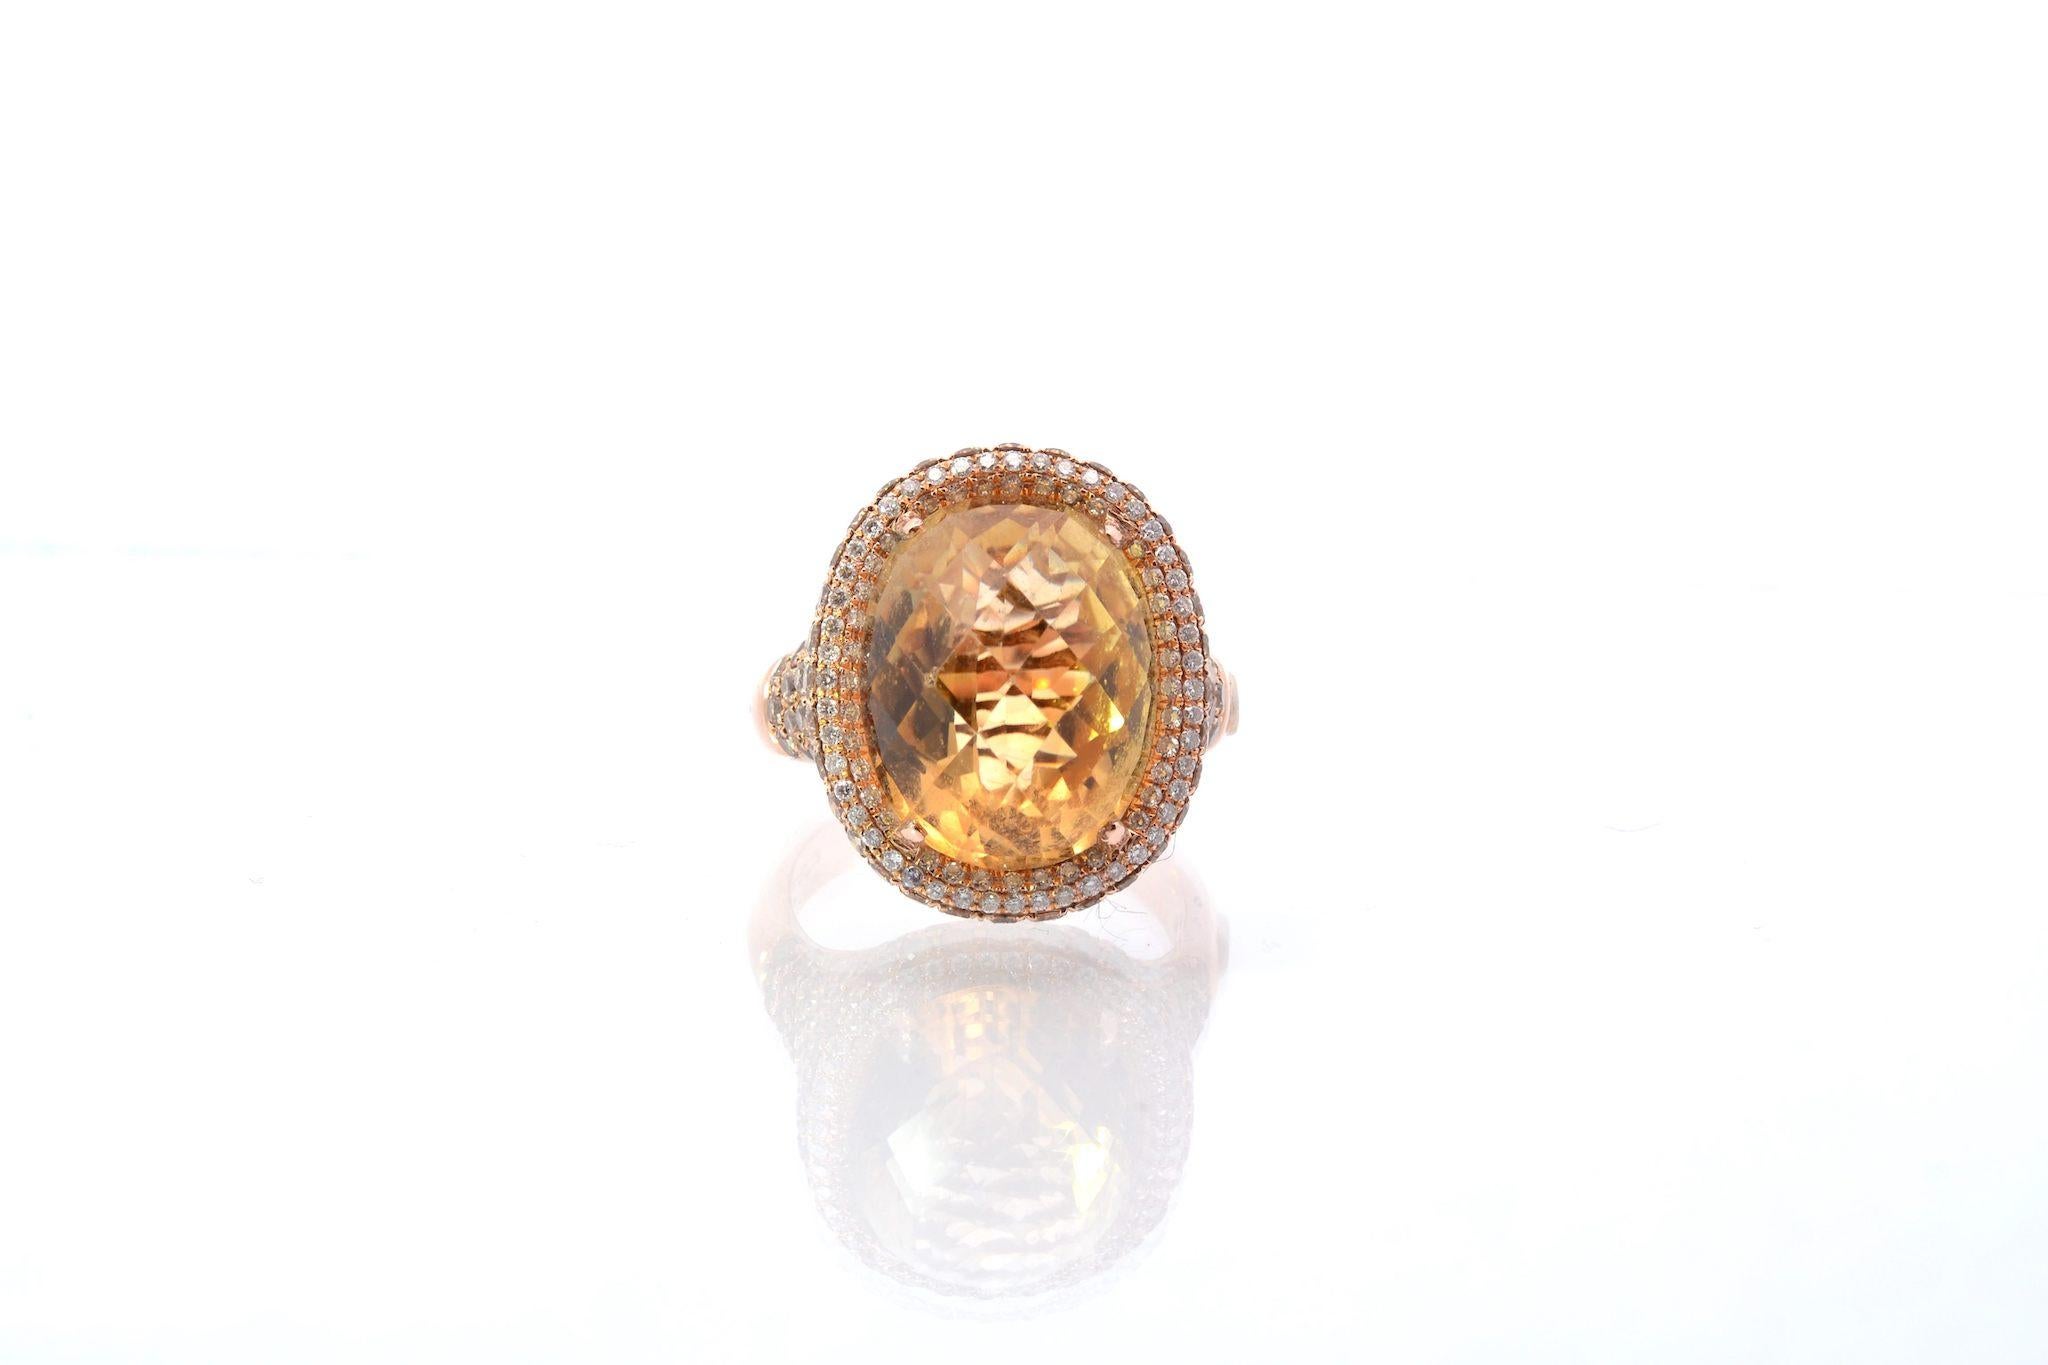 Stones: Faceted cabochon citrine: 13 carats, 201 diamonds: 2, 30 carats.
Material: 18k rose gold
Dimensions: 2 x 1.7 cm
Weight: 10.6 g
Period: Recent
Size: 55 (free sizing)
Certificate
Ref. : 25300